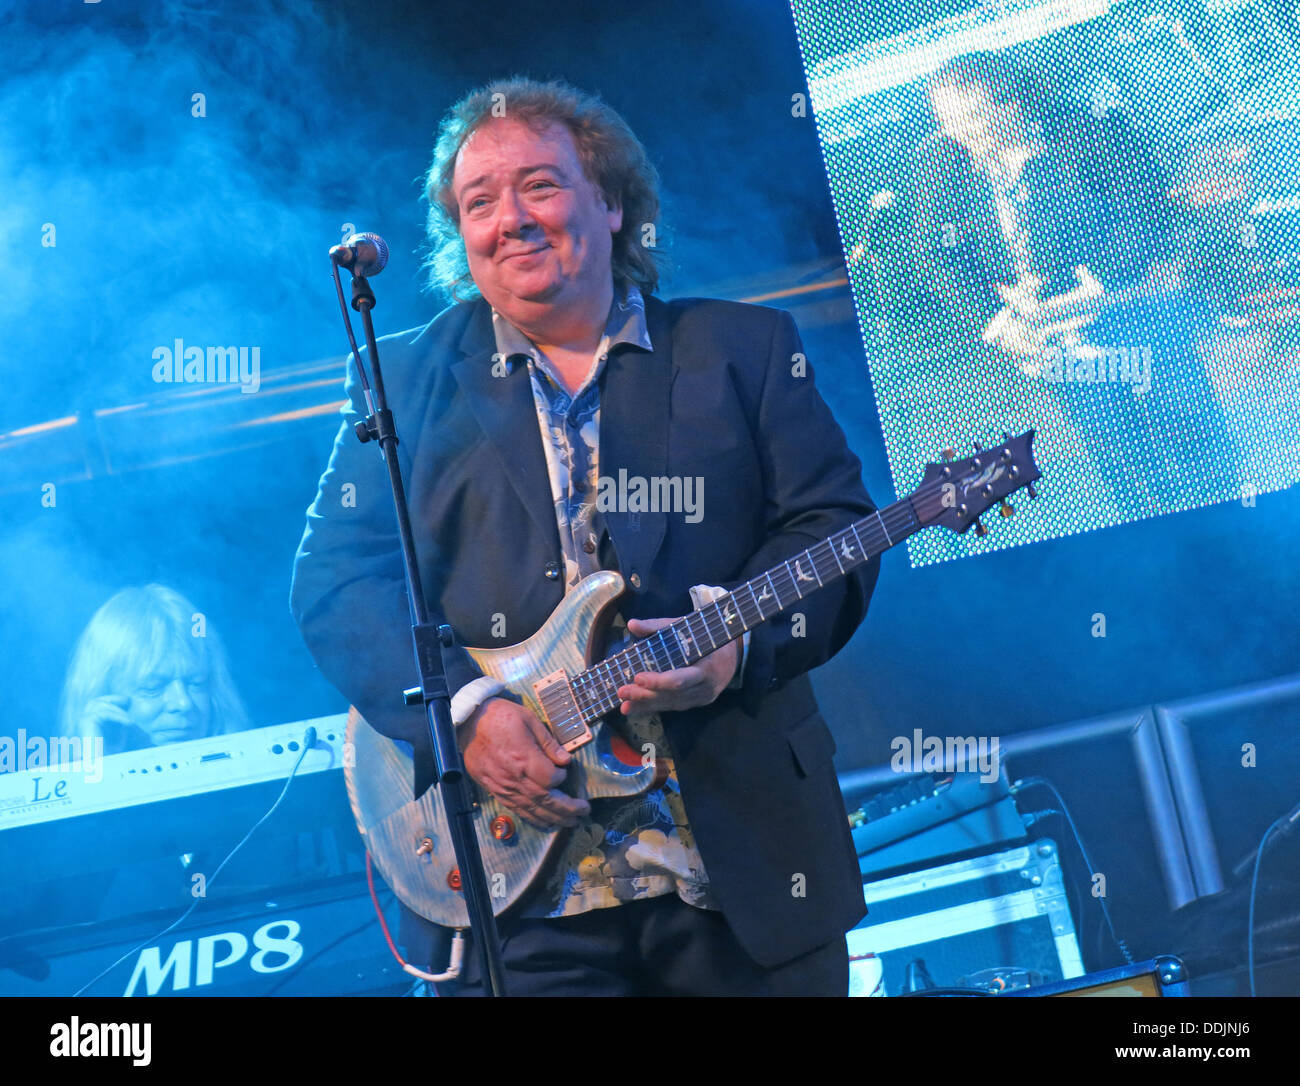 Bernie Marsden of Whitesnake at Silverstone 2013 British GP Grand Prix Woodlands stage with his guitar Stock Photo